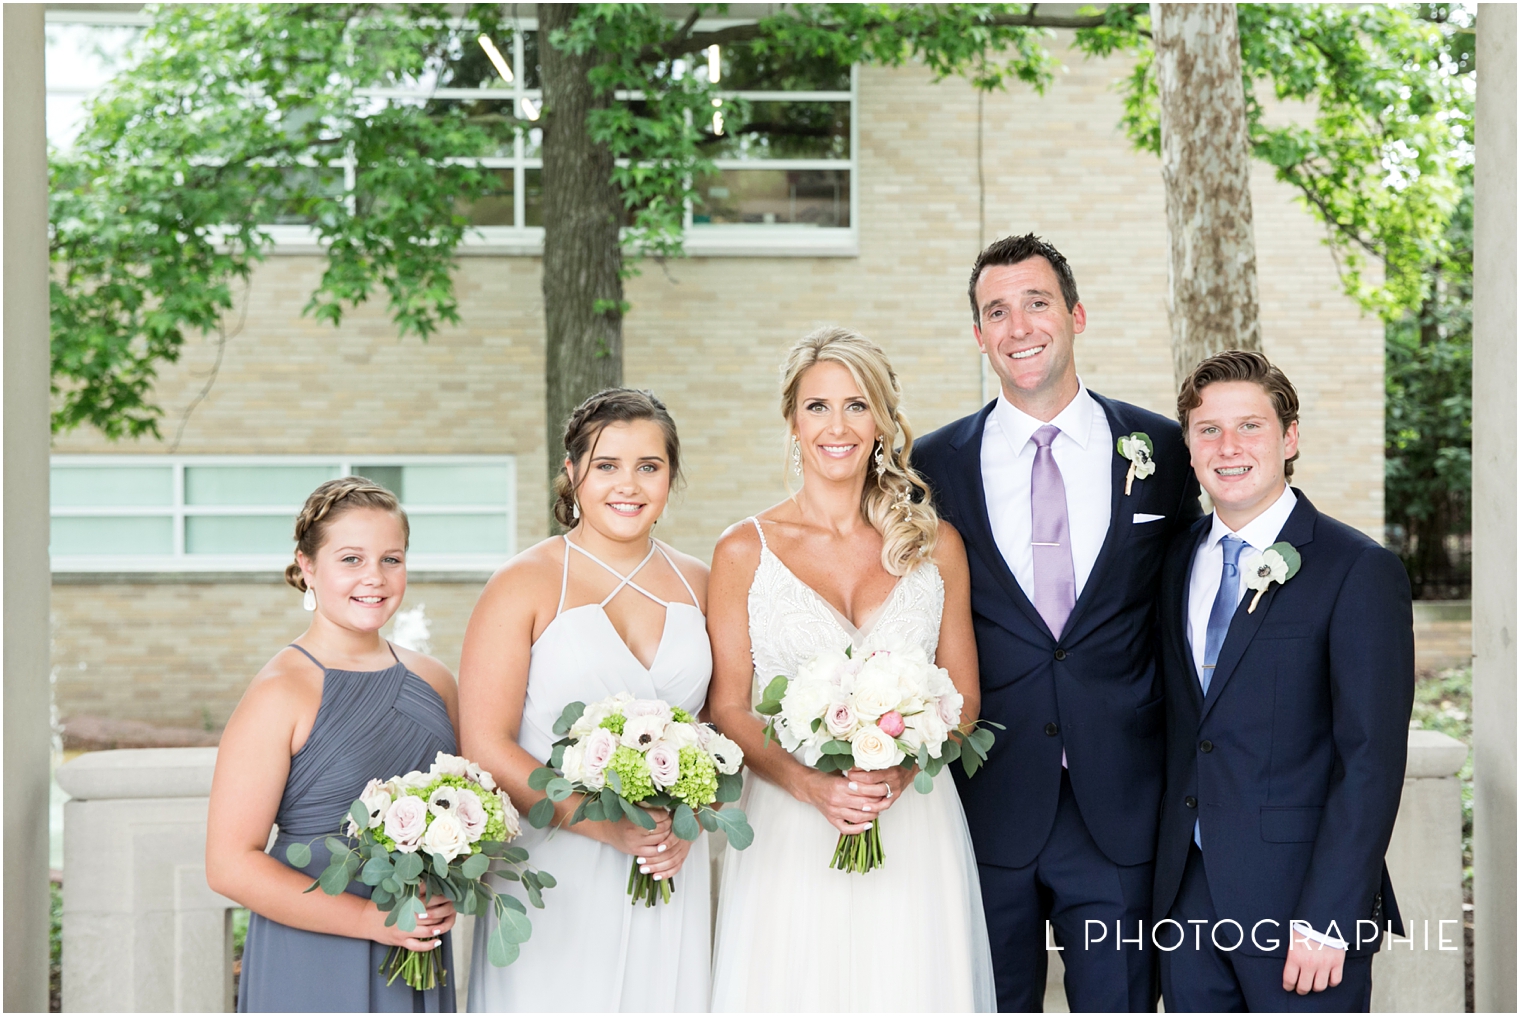 Central West End,Forest Park,June wedding,Kate Hayes,L Photographie,L Photographie weddings,Maronite Heritage Institute,Midwest wedding photographer,St. Louis wedding,St. Louis wedding photographer,St. Louis wedding photography,St. Raymond's Maronite Cathedral,Taylor Park,lavender bridesmaid dress,purple bridesmaid dress,summer wedding,wedding photos at the Muny,